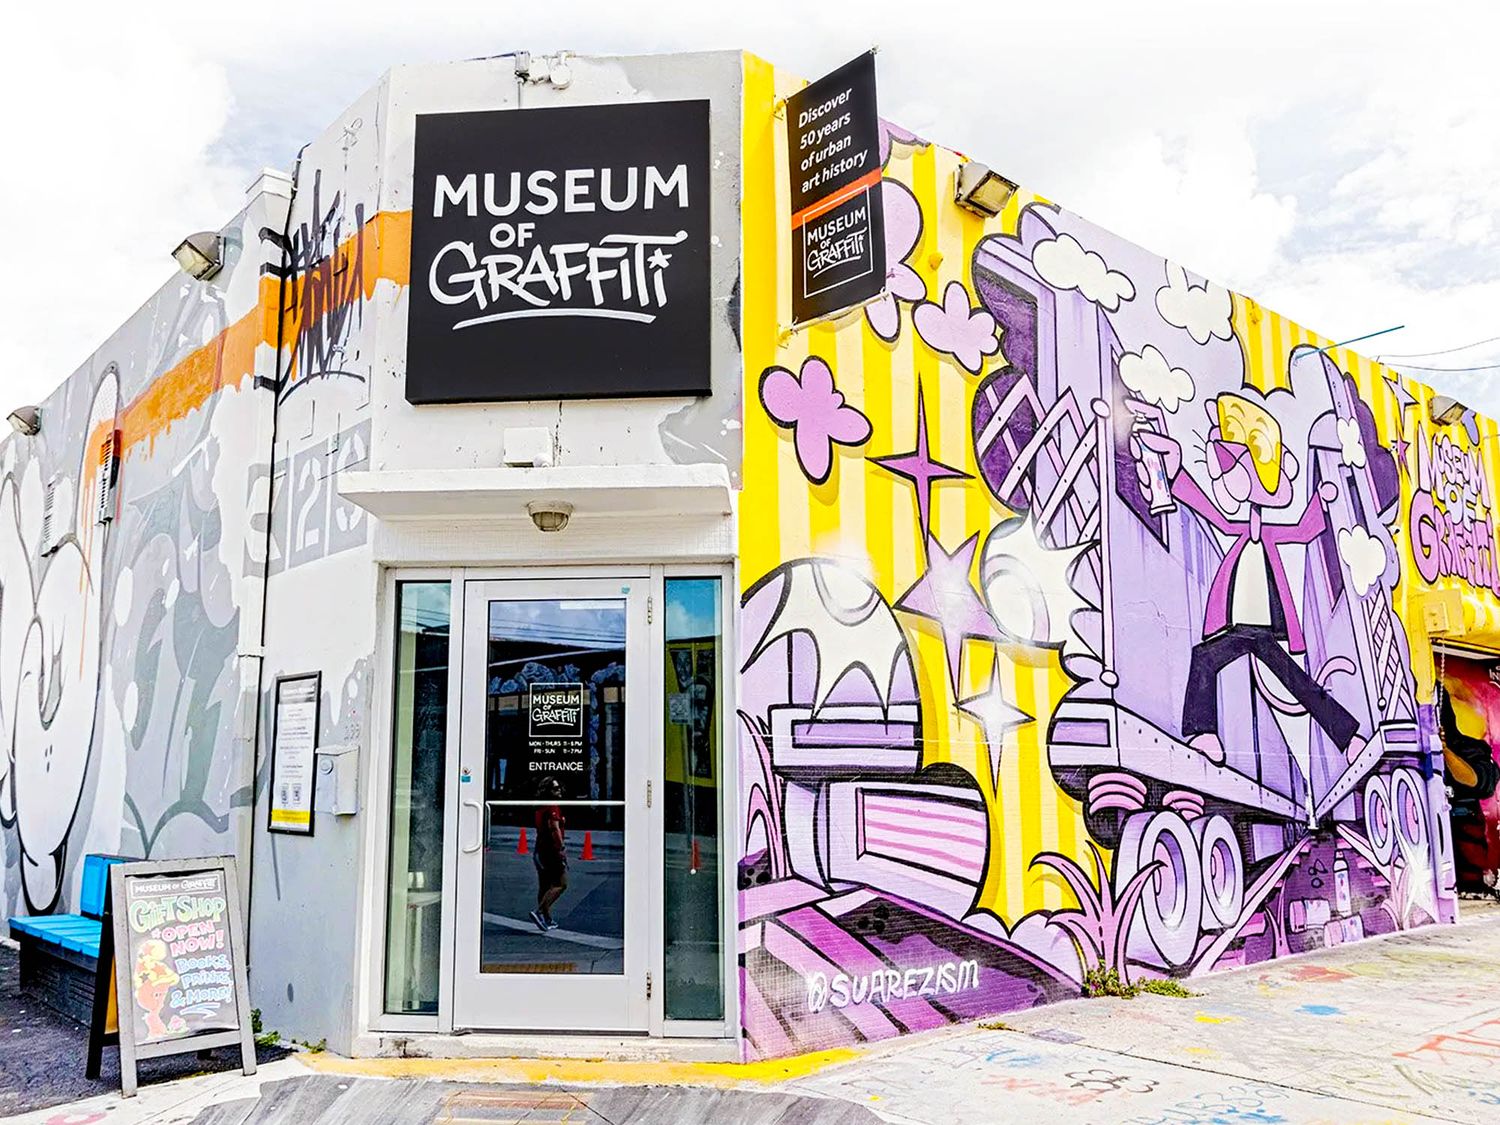 Opened in 2019 in the artistic district of Wynwood in Miami, the Museum of Graffiti is a place dedicated to graffiti writers from around the world which aim to tell history of this art form (@Museum of Graffiti).